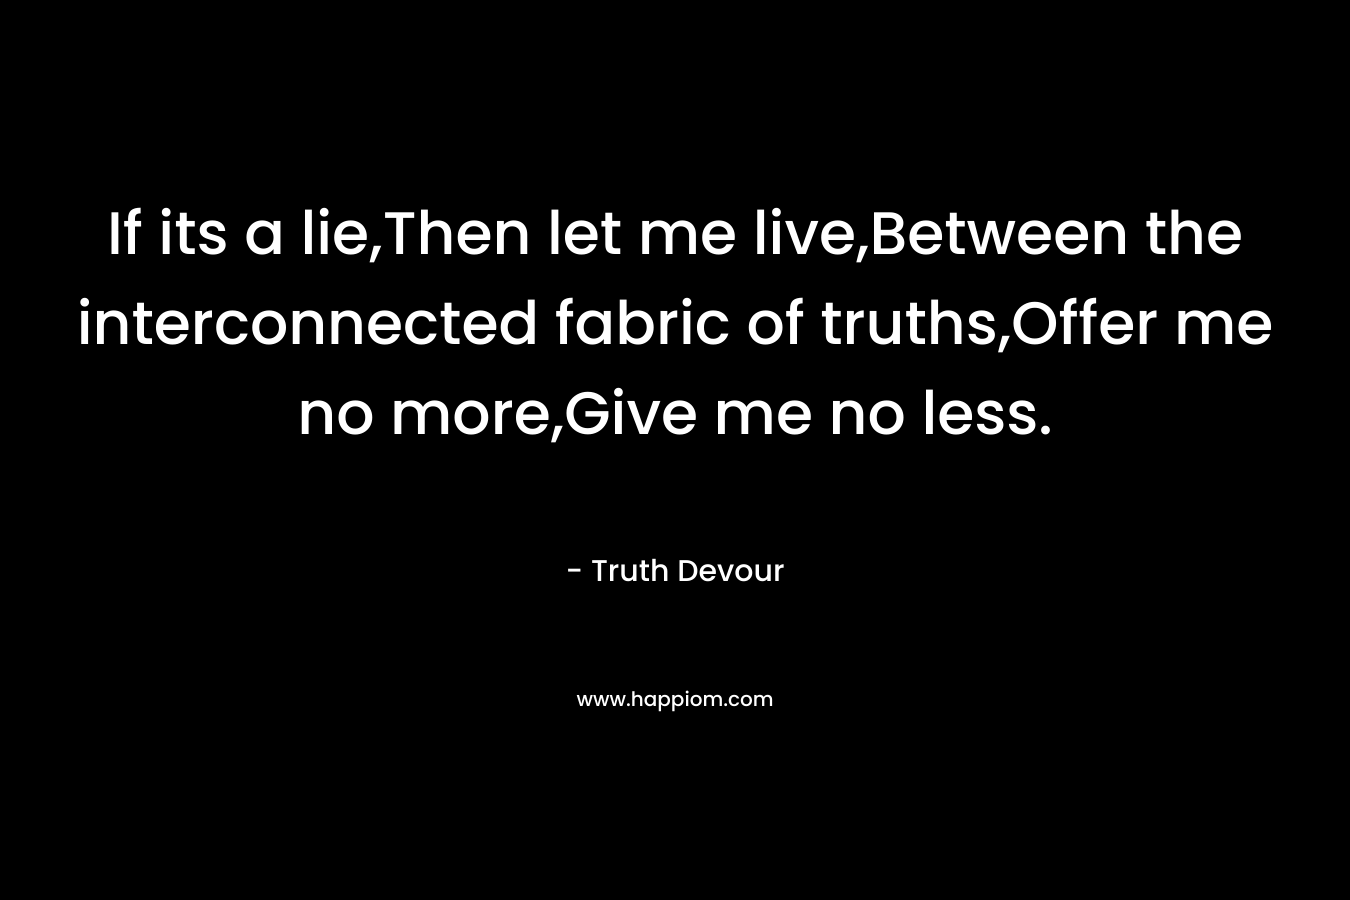 If its a lie,Then let me live,Between the interconnected fabric of truths,Offer me no more,Give me no less. – Truth Devour